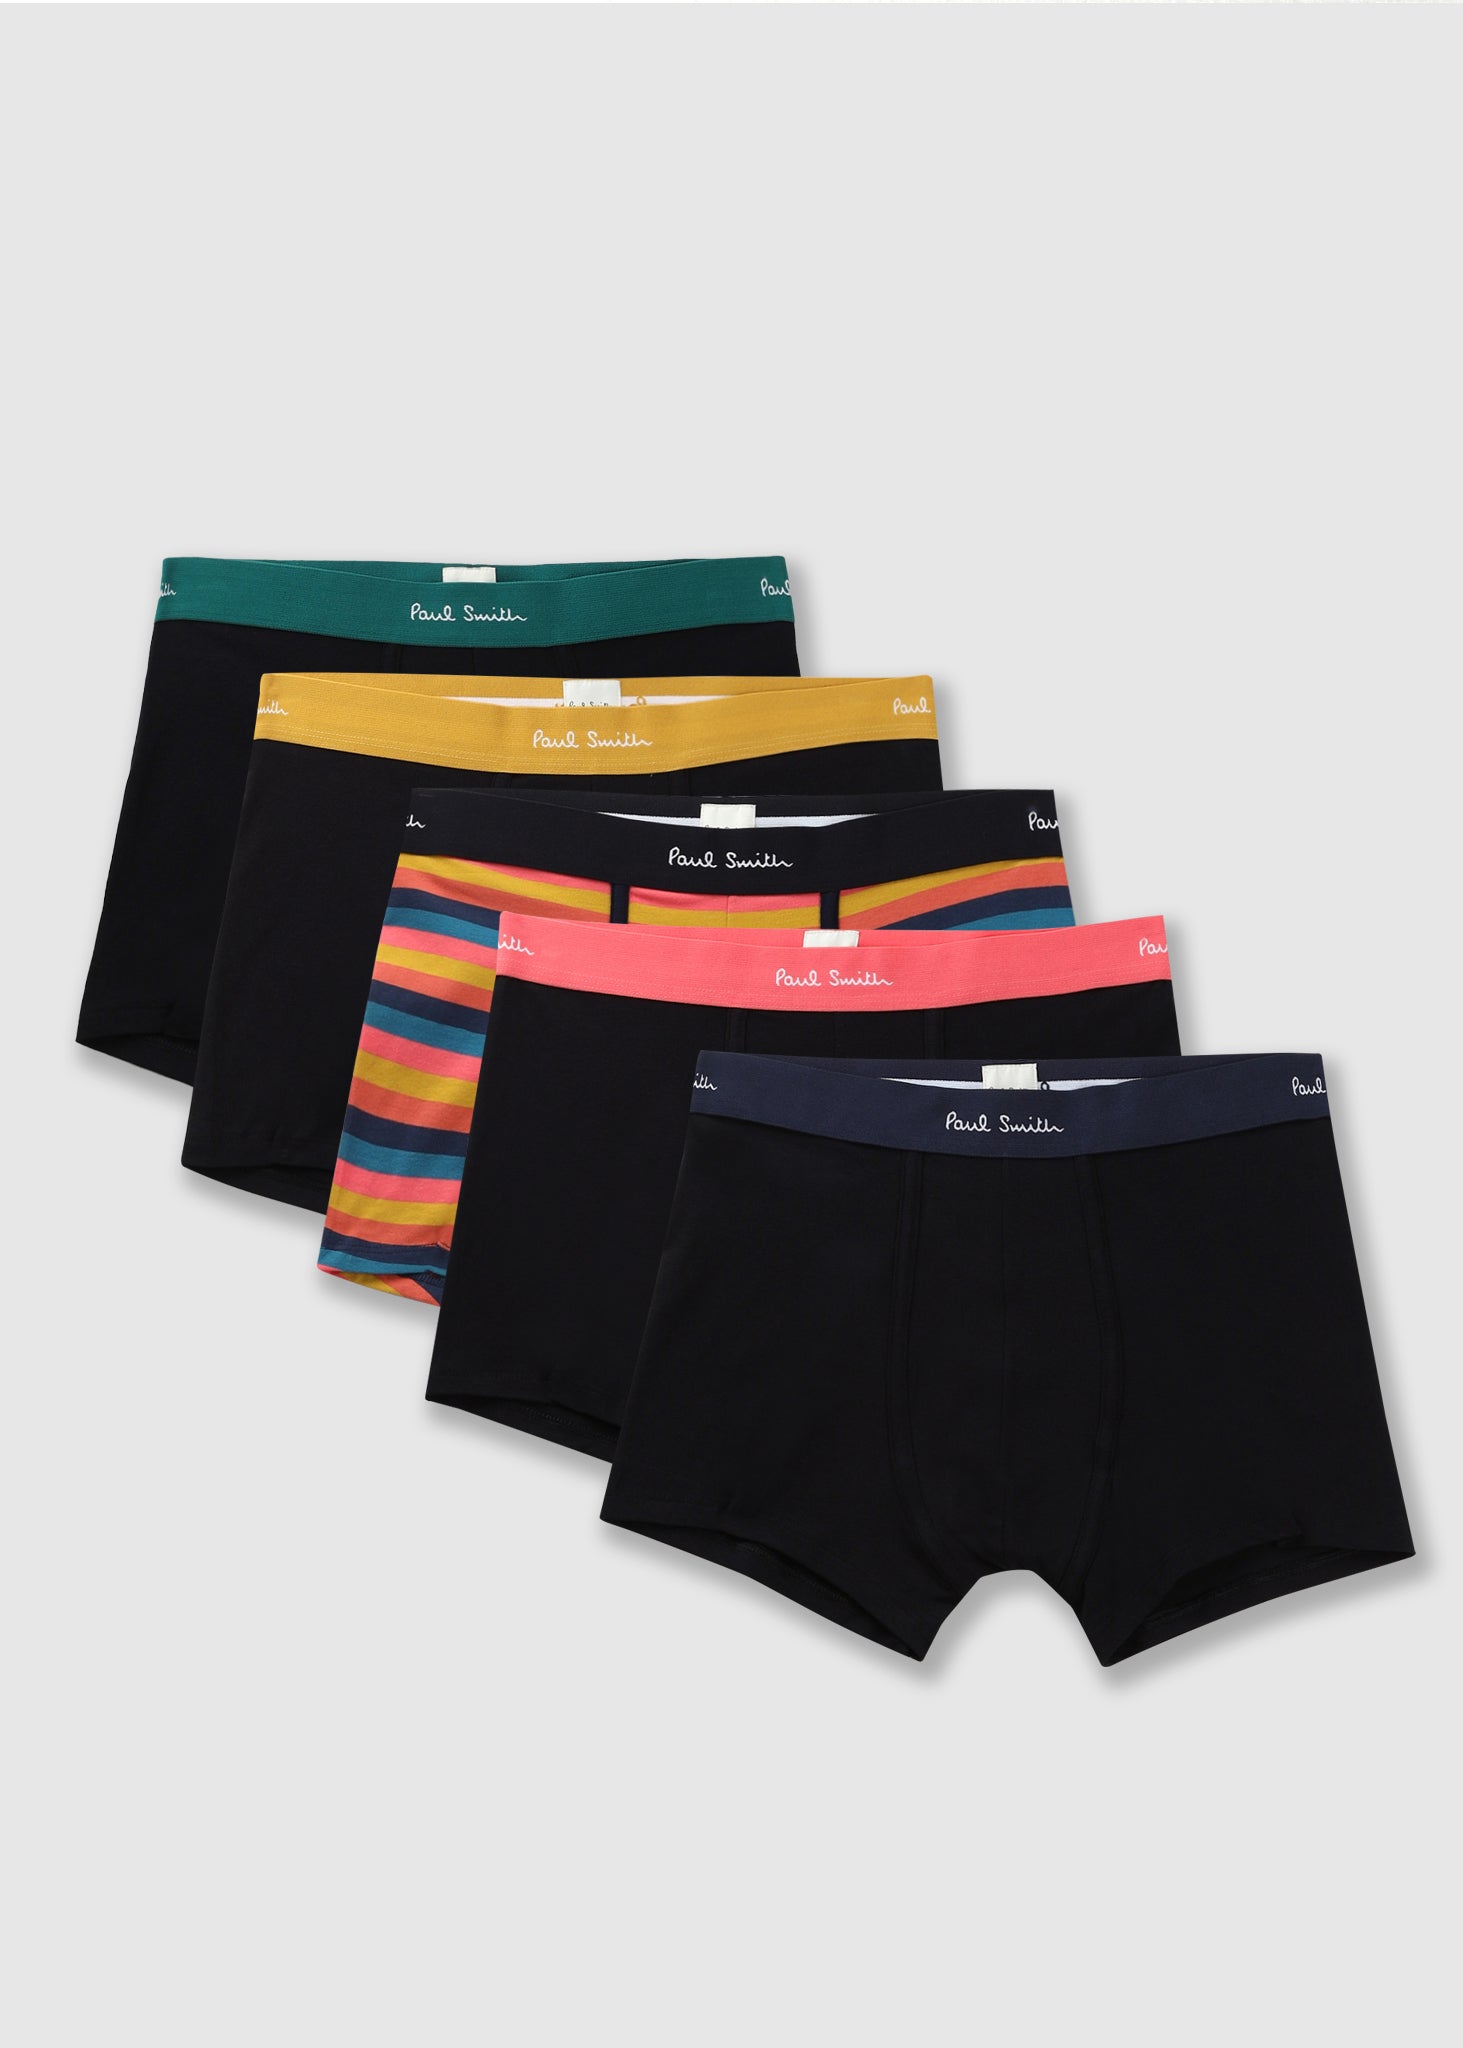 Image of Paul Smith Mens Trunk 5 Pack In Black